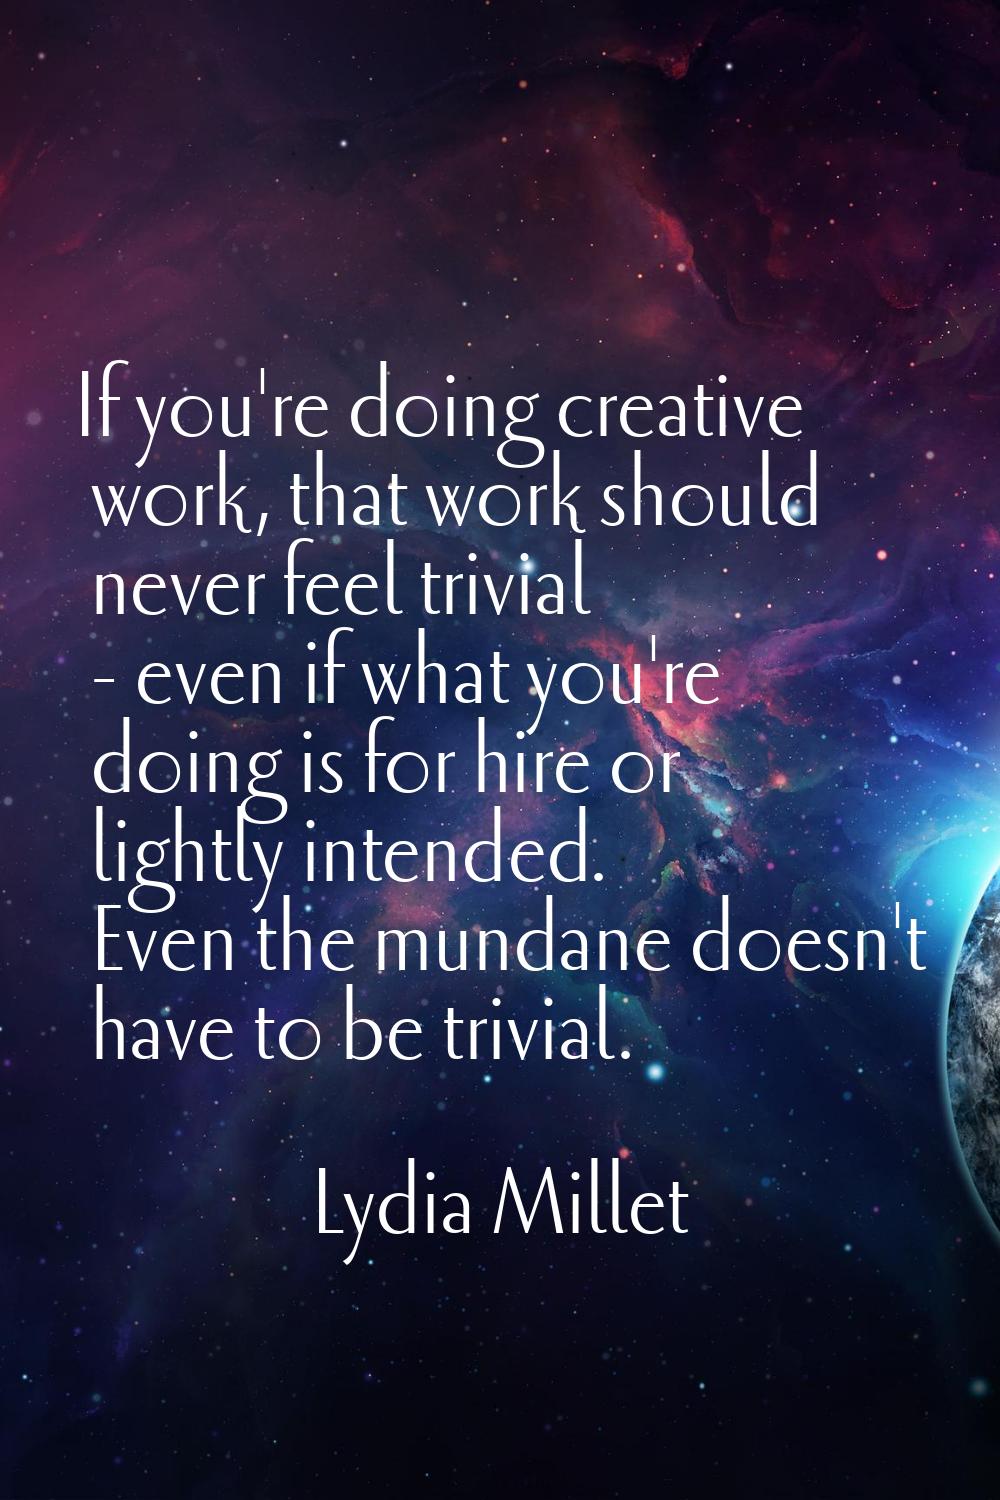 If you're doing creative work, that work should never feel trivial - even if what you're doing is f